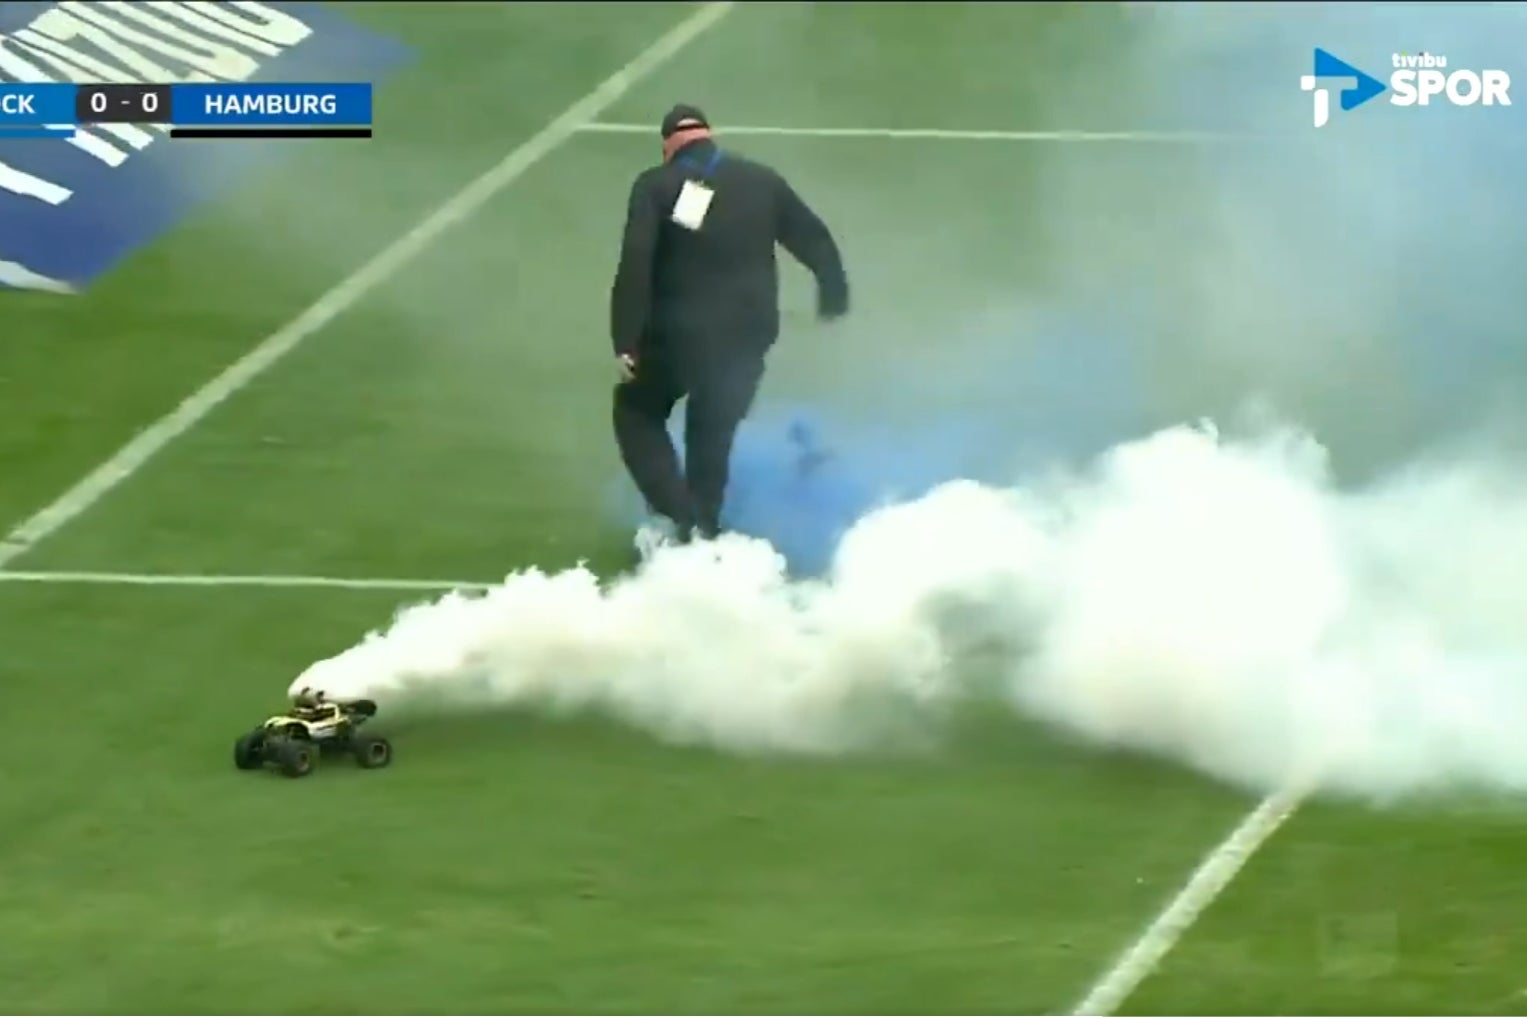 Remote control cars carrying flares drove on the pitch